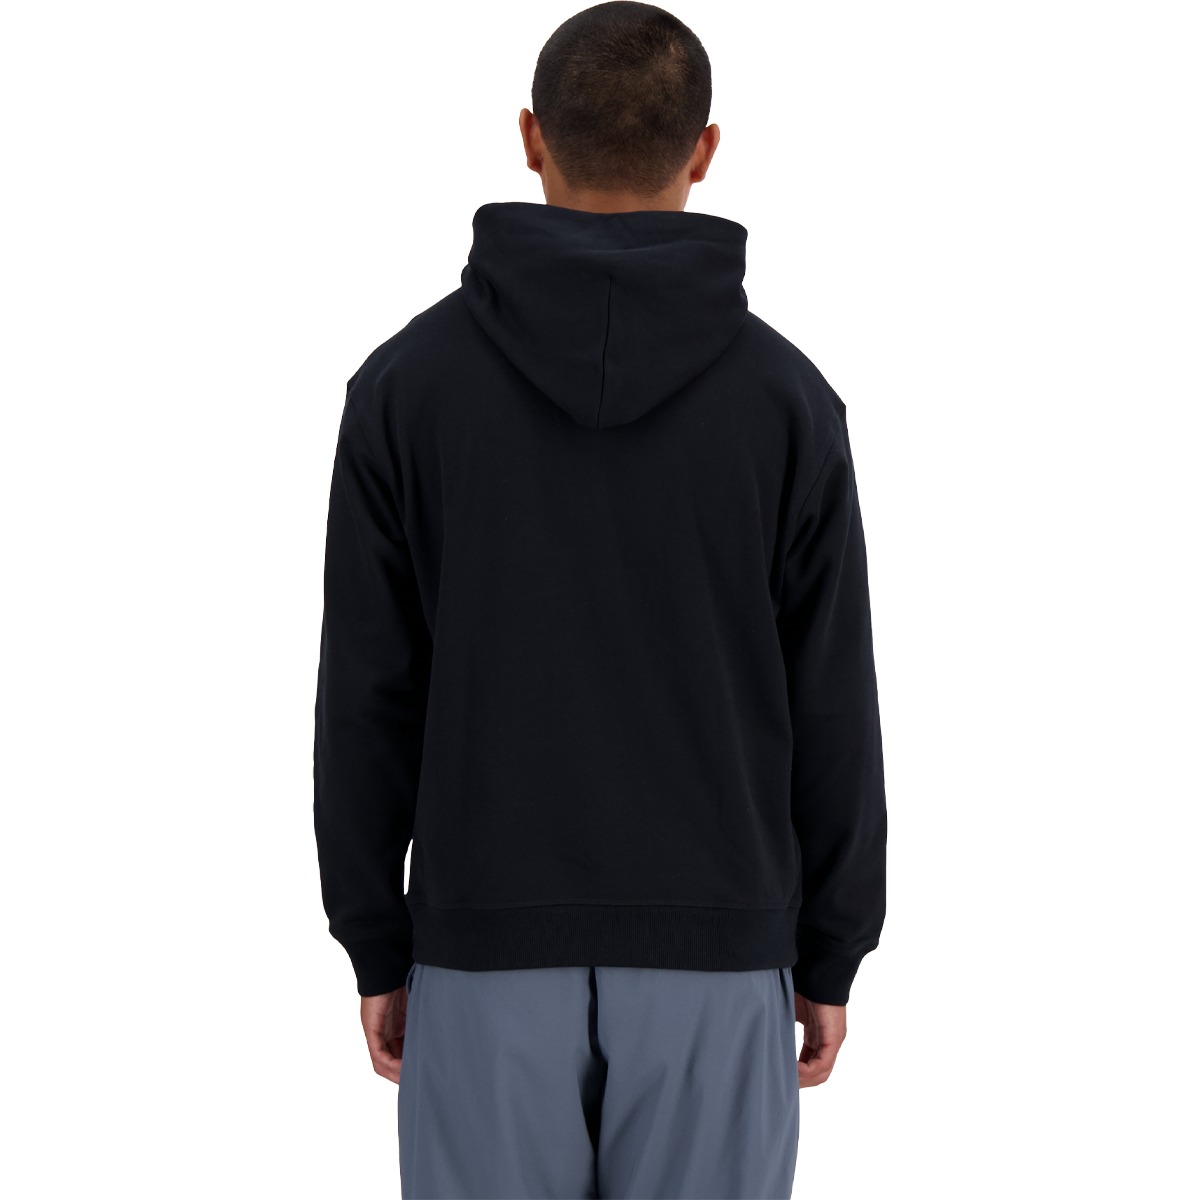 Men's NB Athletics French Terry Hoodie alternate view